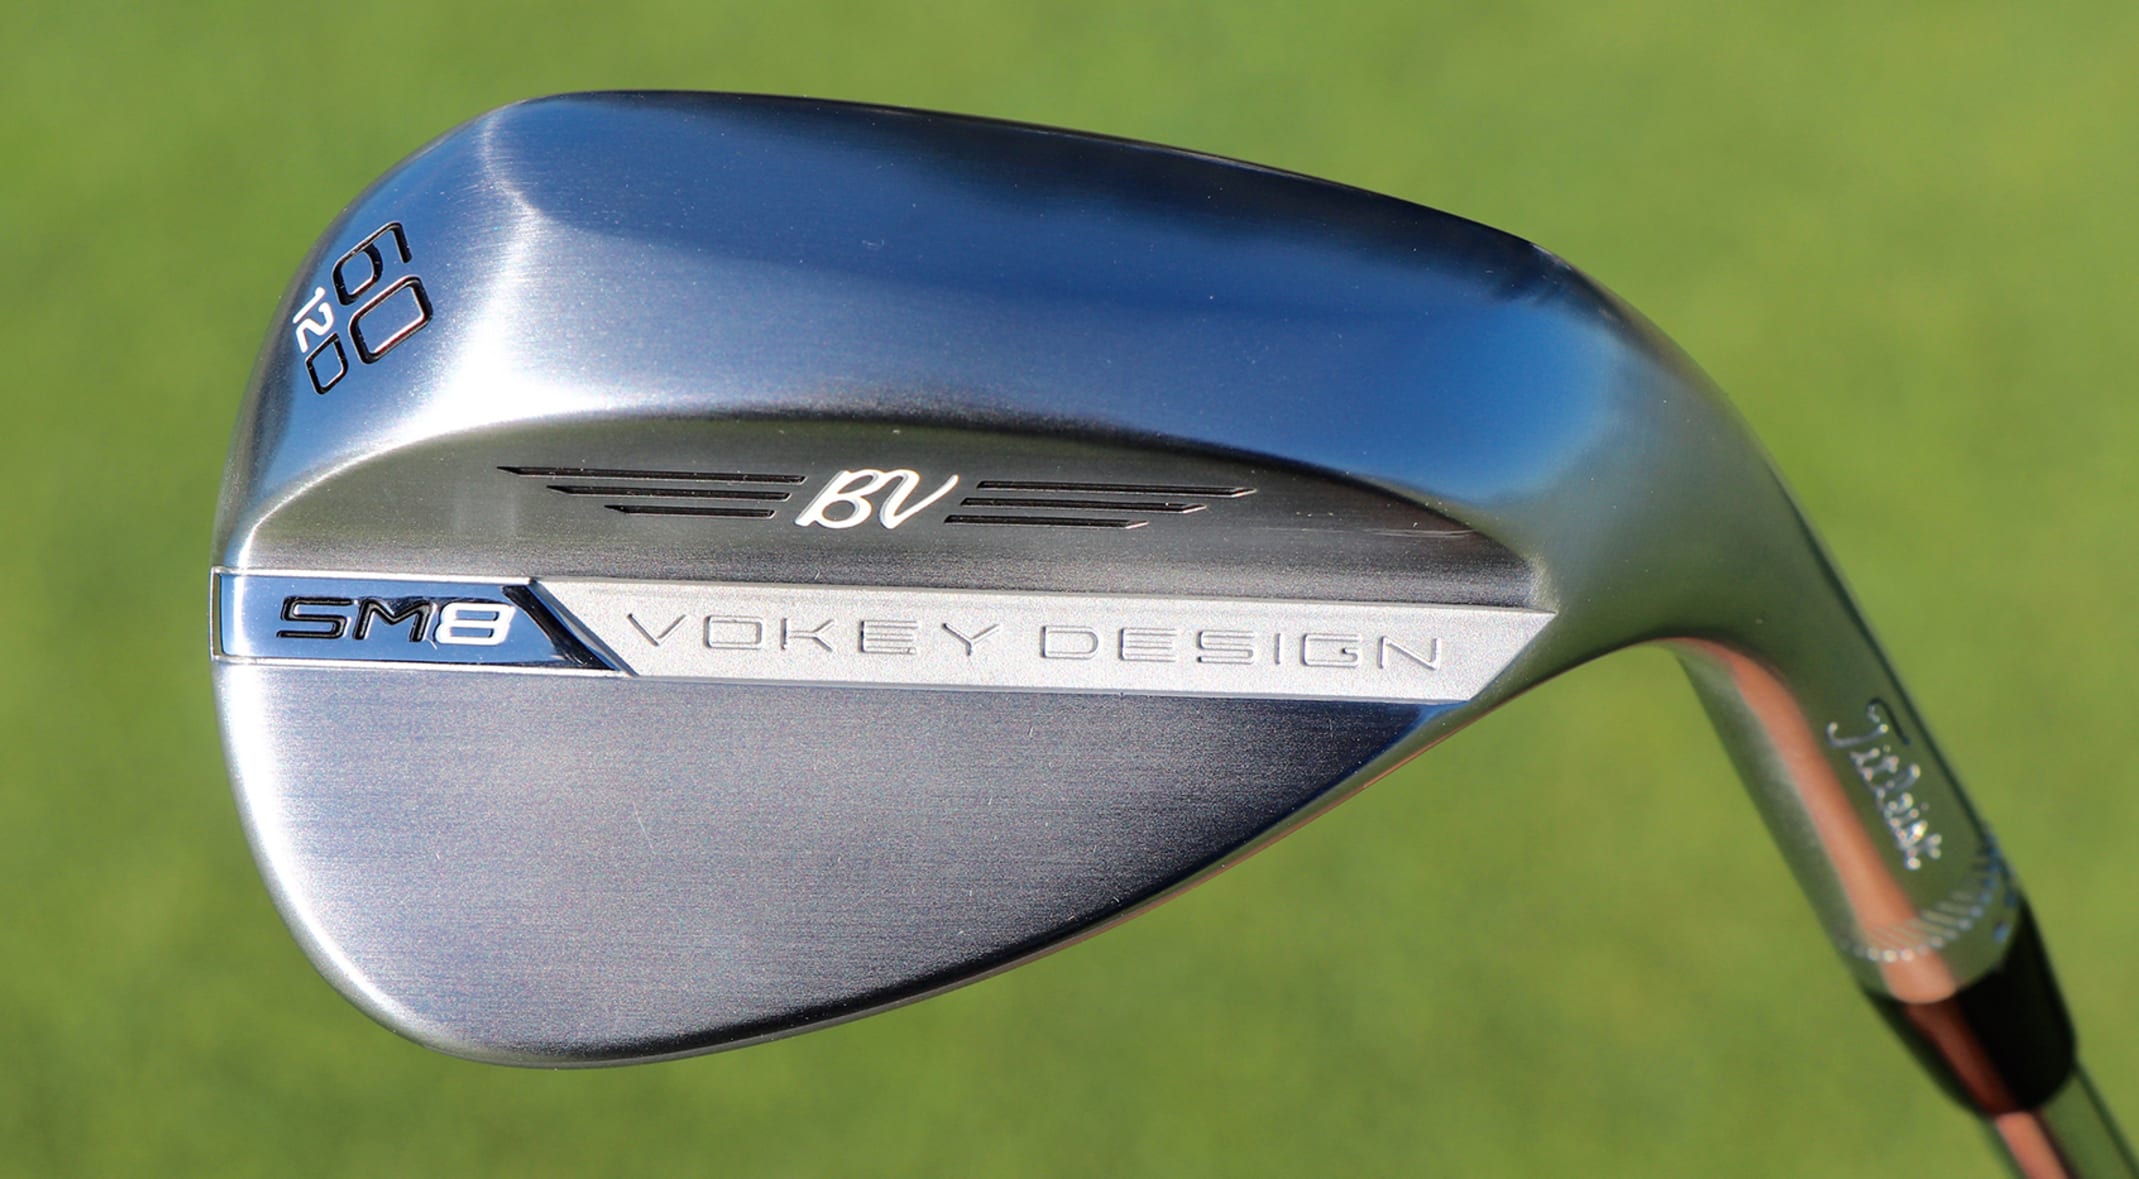 Titleist's new Vokey SM8 wedges spotted 